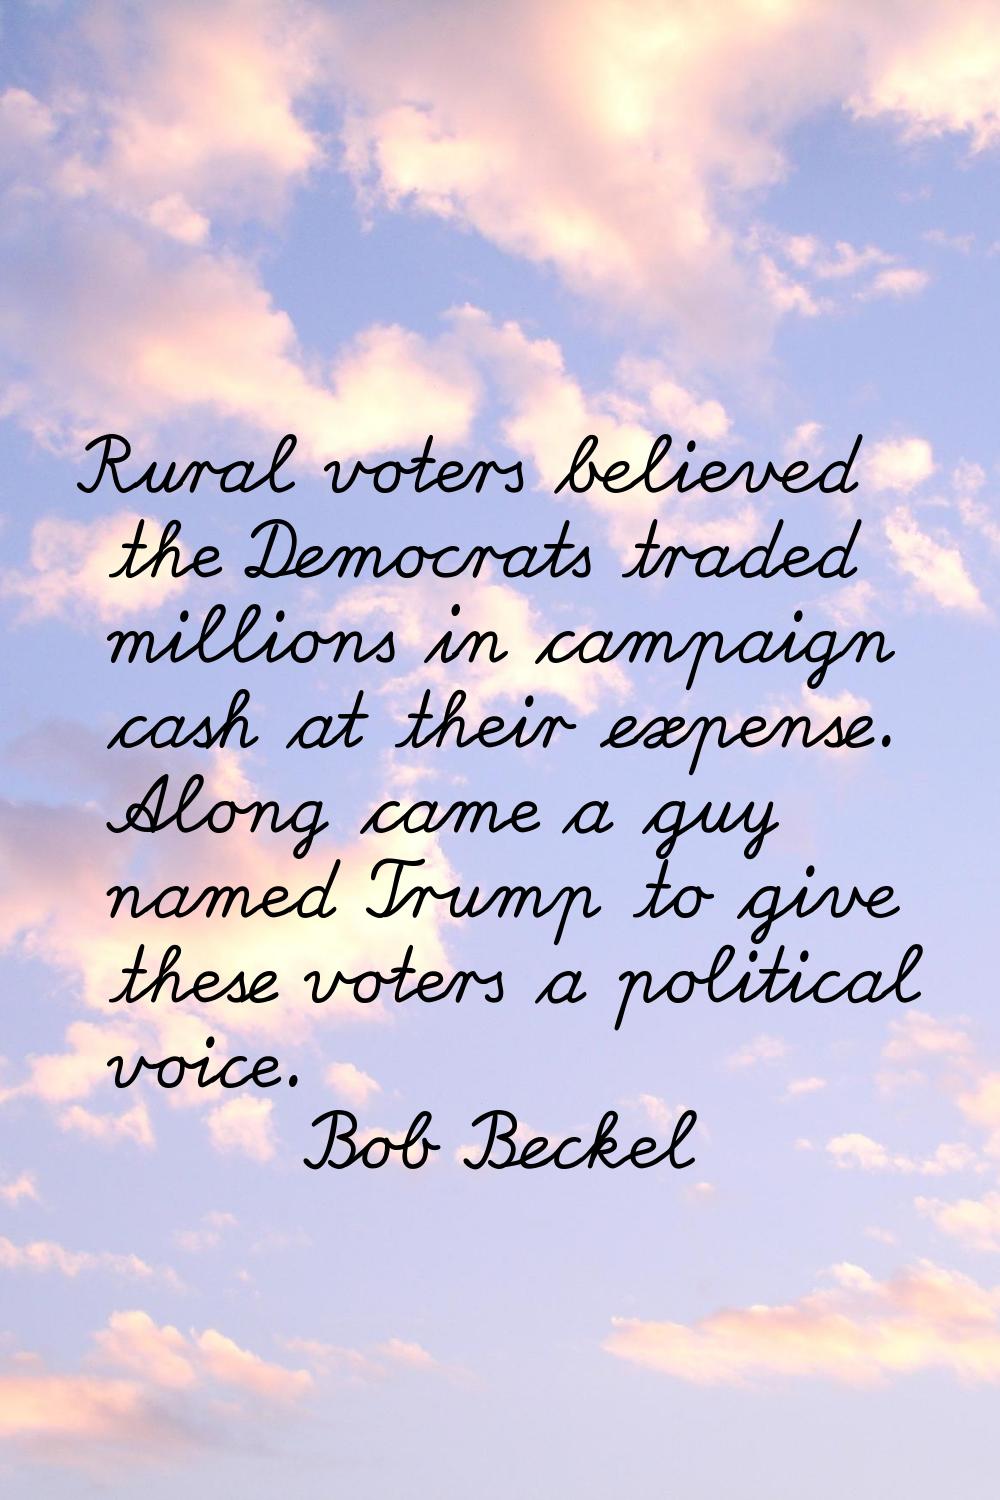 Rural voters believed the Democrats traded millions in campaign cash at their expense. Along came a